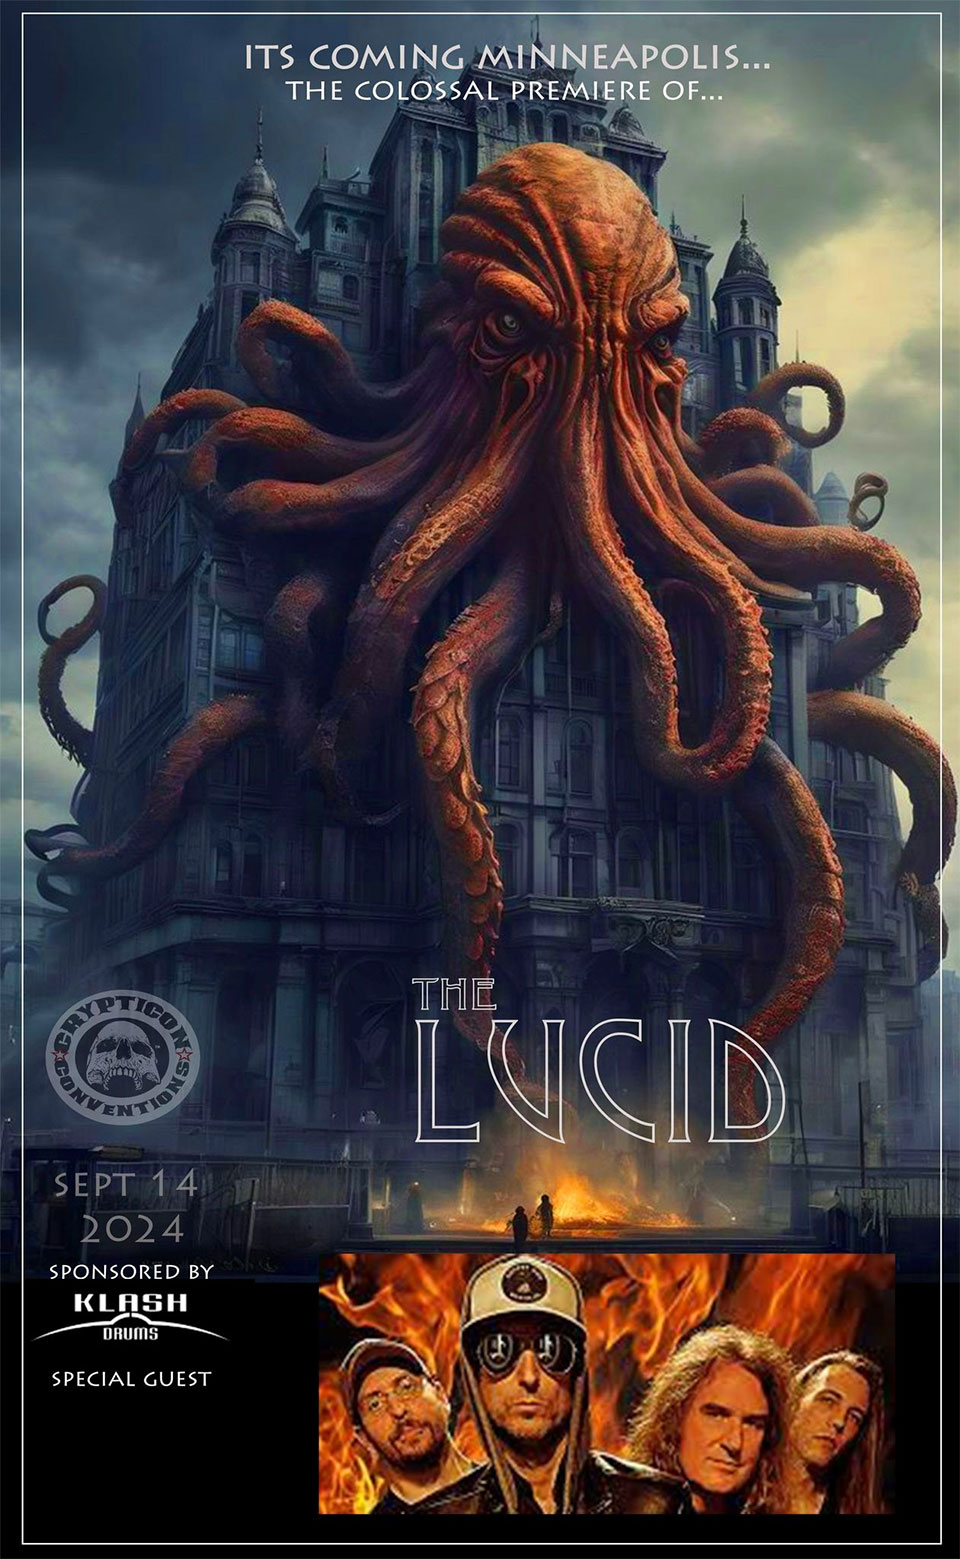 The Lucid